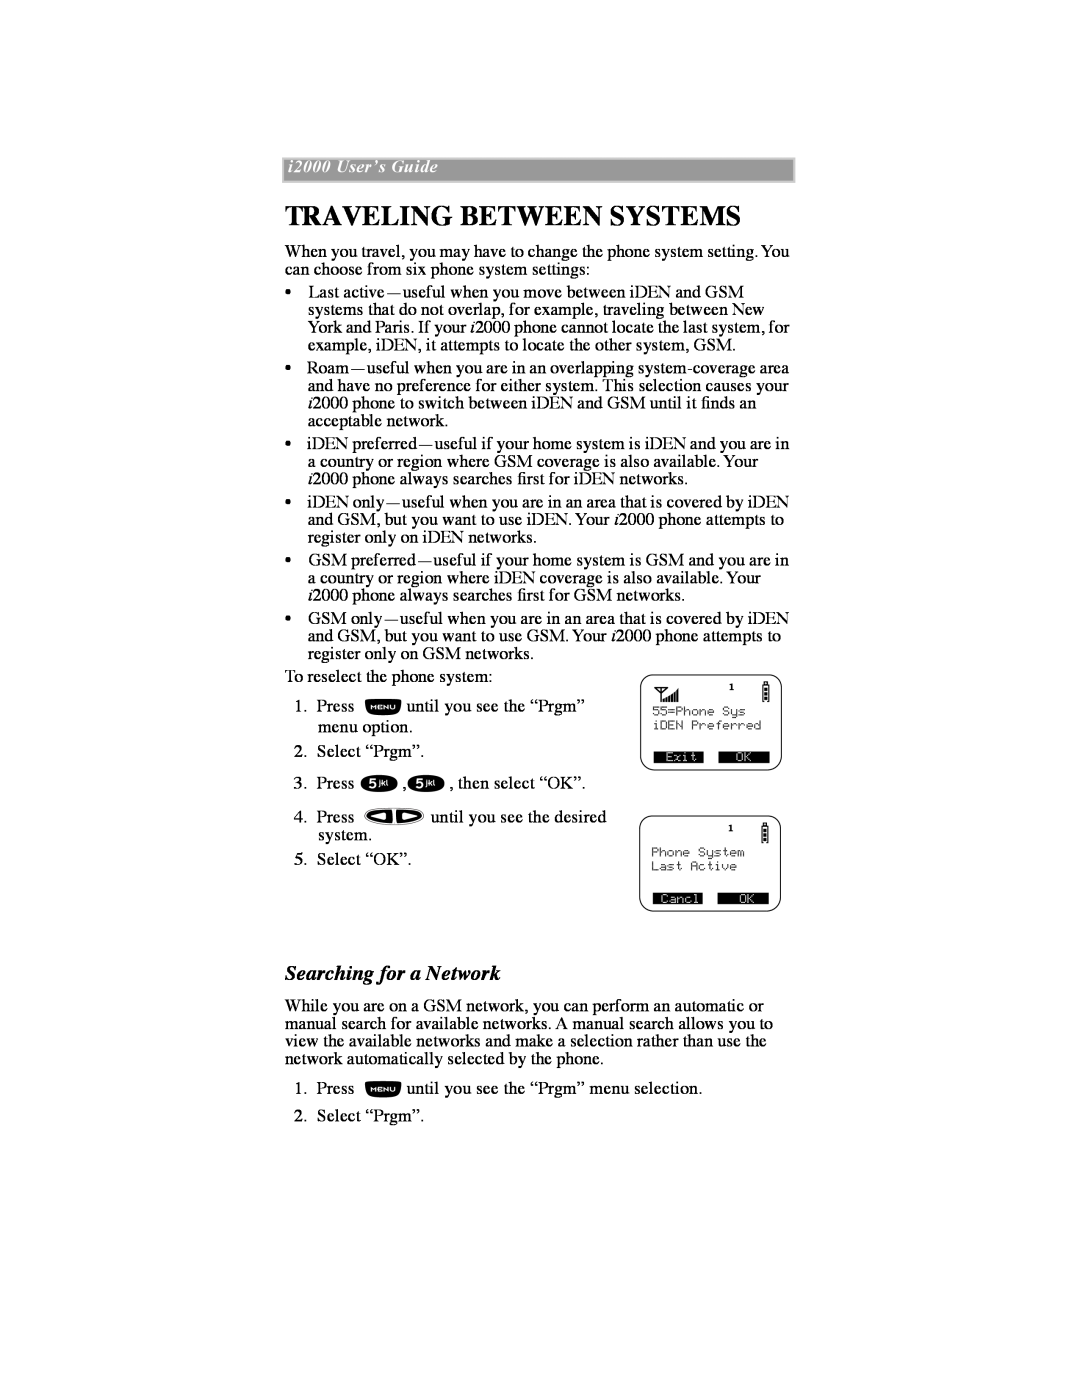 Motorola iDEN manual Traveling Between Systems, Searching for a Network, i2000 UserÕs Guide 